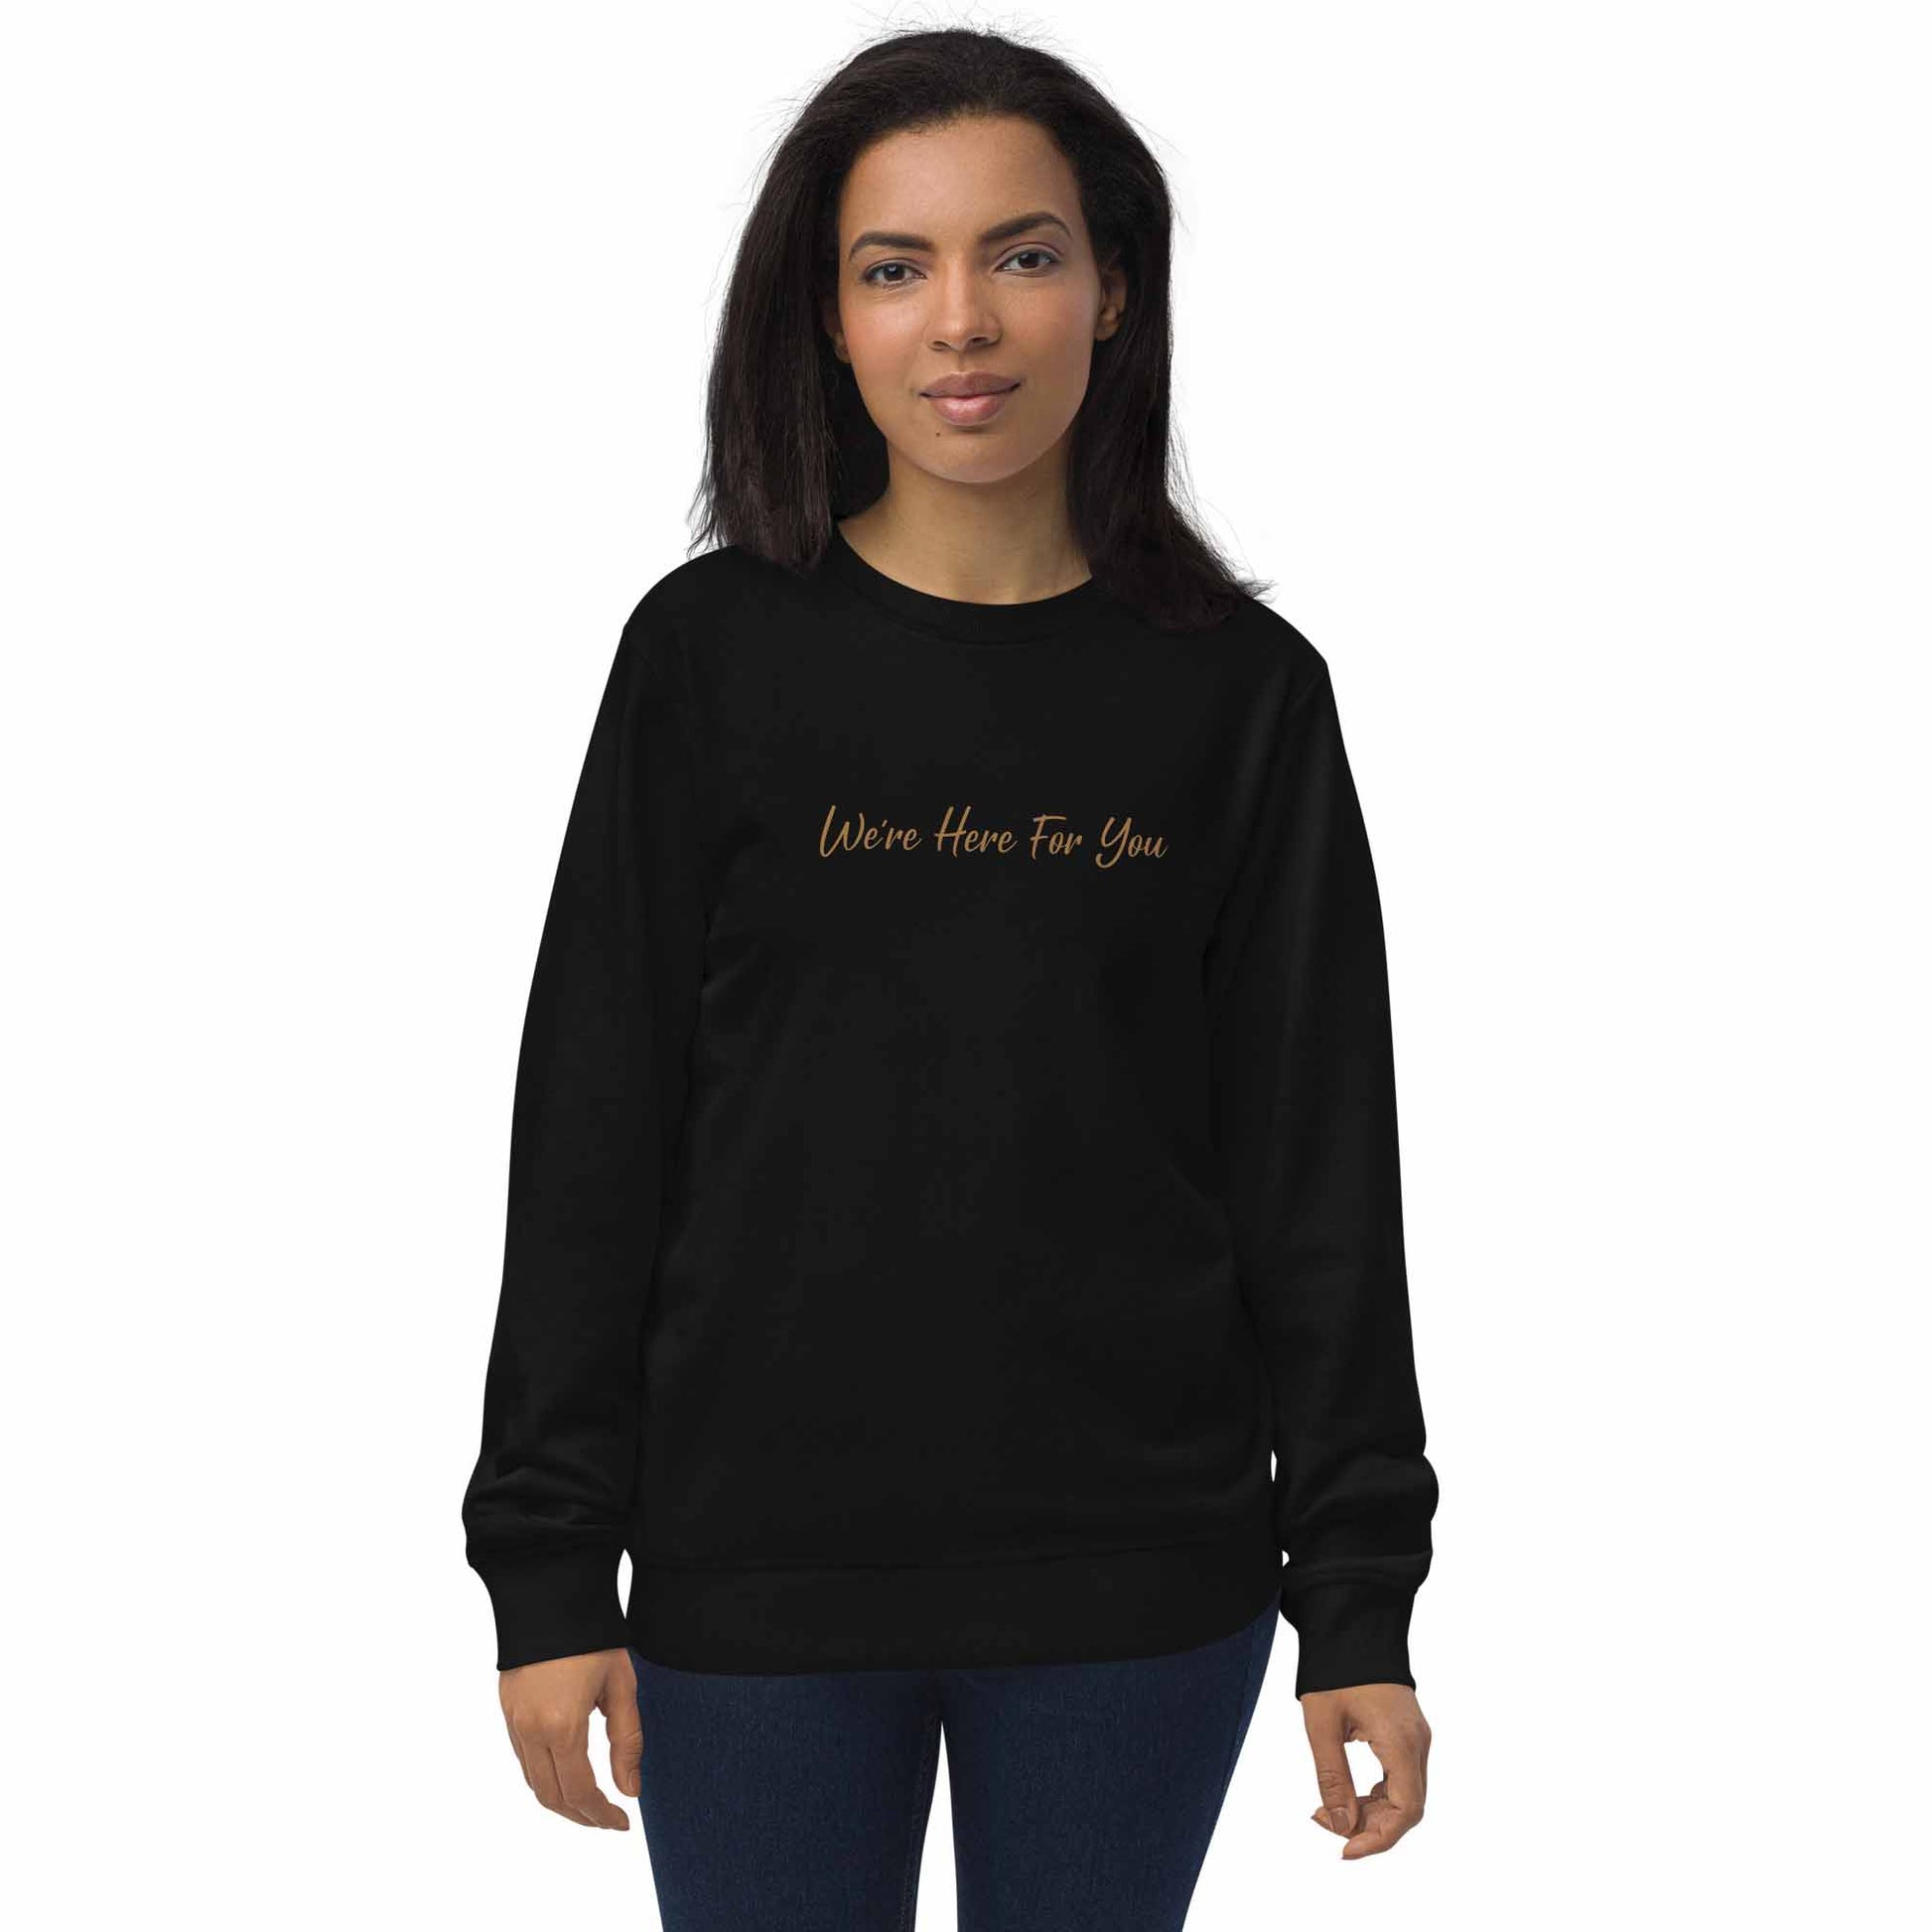 Women black organic cotton sweatshirt with inspirational quote, "We Are Here For You."